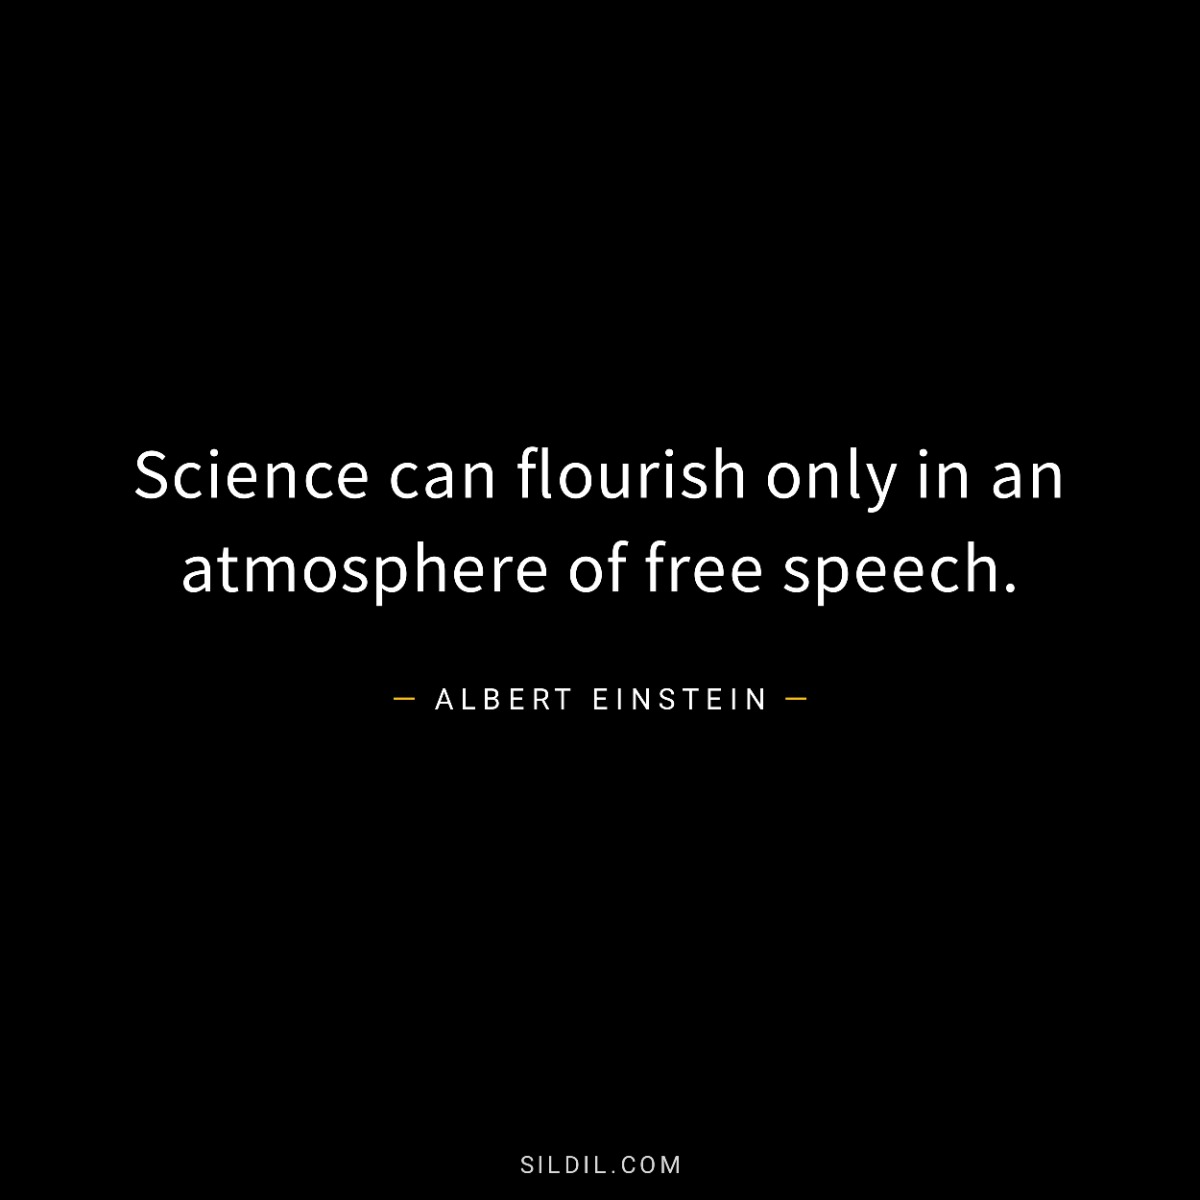 Science can flourish only in an atmosphere of free speech.